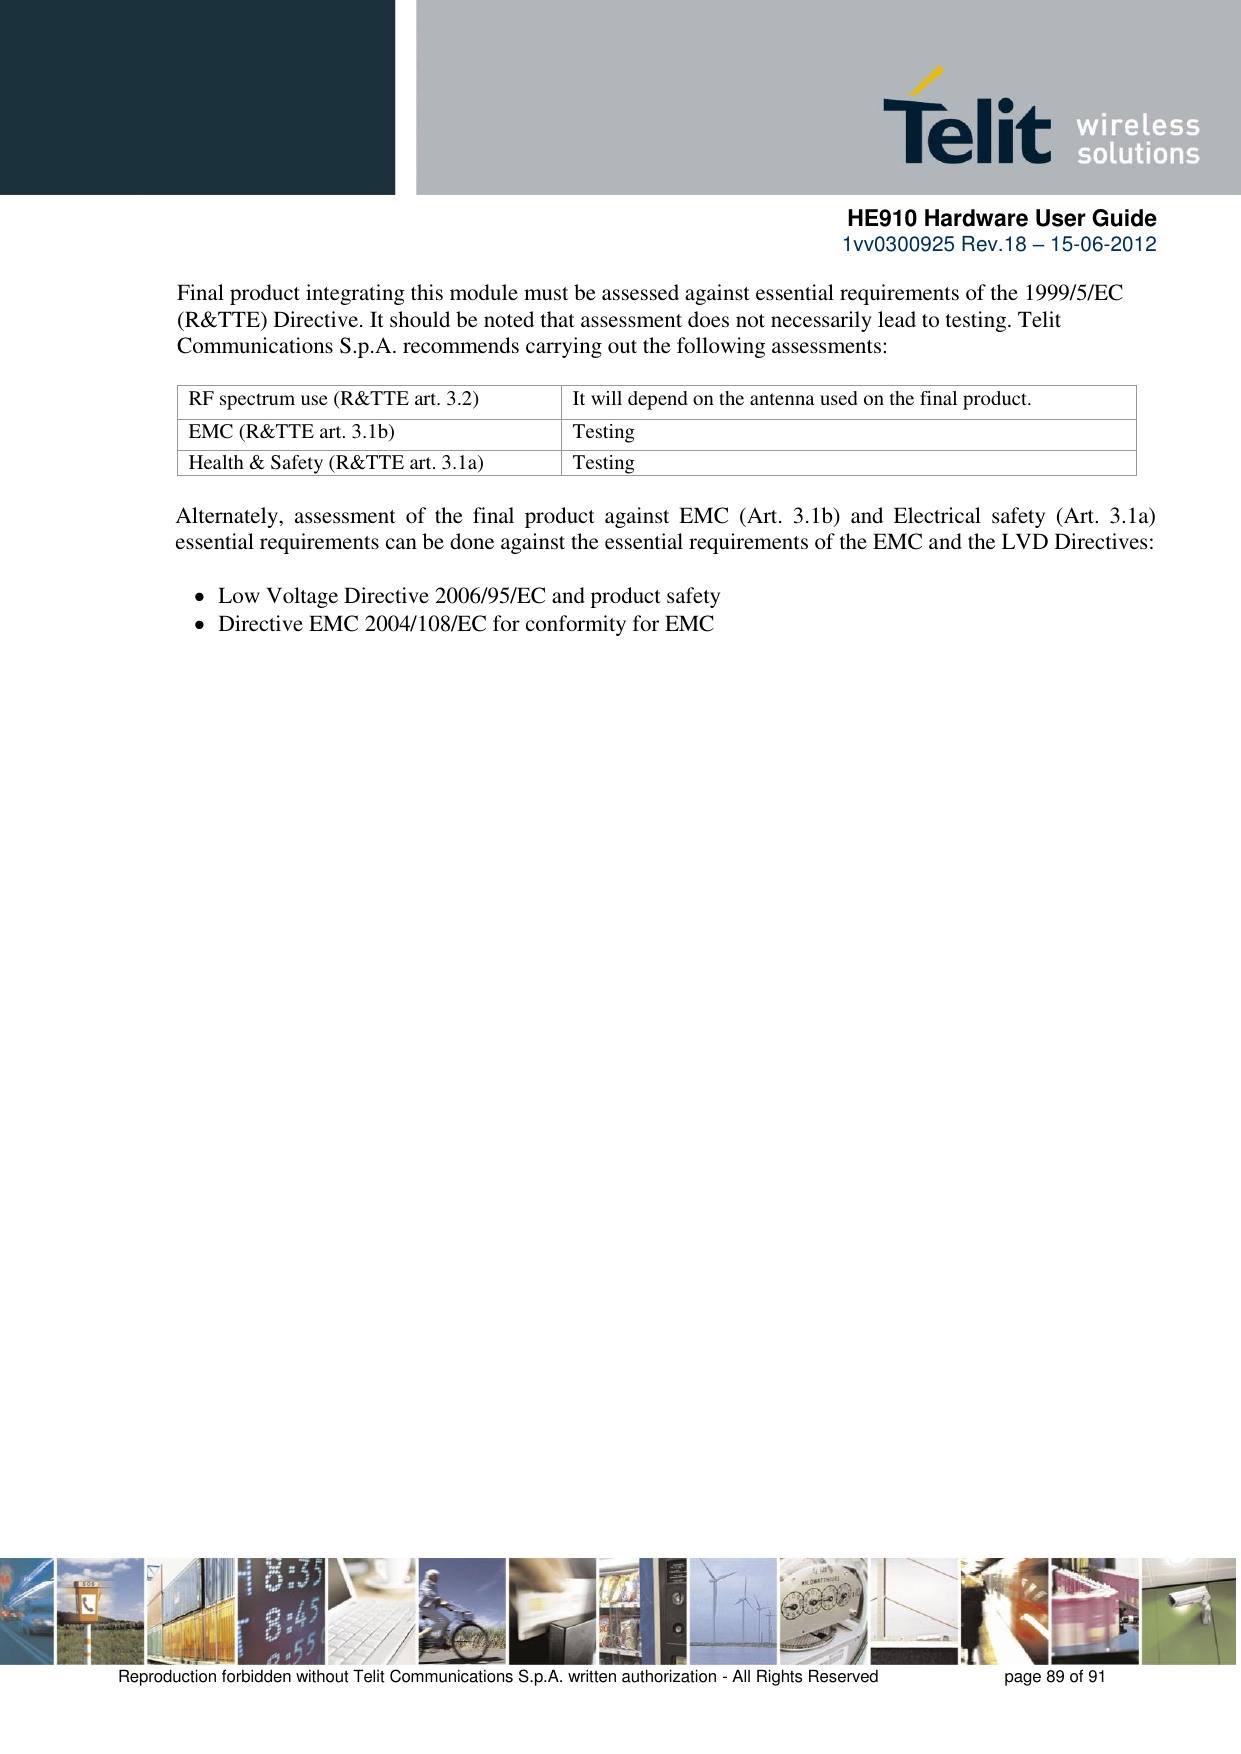      HE910 Hardware User Guide 1vv0300925 Rev.18 – 15-06-2012    Reproduction forbidden without Telit Communications S.p.A. written authorization - All Rights Reserved    page 89 of 91  Final product integrating this module must be assessed against essential requirements of the 1999/5/EC (R&amp;TTE) Directive. It should be noted that assessment does not necessarily lead to testing. Telit Communications S.p.A. recommends carrying out the following assessments:  RF spectrum use (R&amp;TTE art. 3.2) It will depend on the antenna used on the final product. EMC (R&amp;TTE art. 3.1b) Testing Health &amp; Safety (R&amp;TTE art. 3.1a) Testing  Alternately,  assessment  of  the  final  product  against  EMC  (Art.  3.1b)  and  Electrical  safety  (Art.  3.1a) essential requirements can be done against the essential requirements of the EMC and the LVD Directives:     Low Voltage Directive 2006/95/EC and product safety    Directive EMC 2004/108/EC for conformity for EMC 